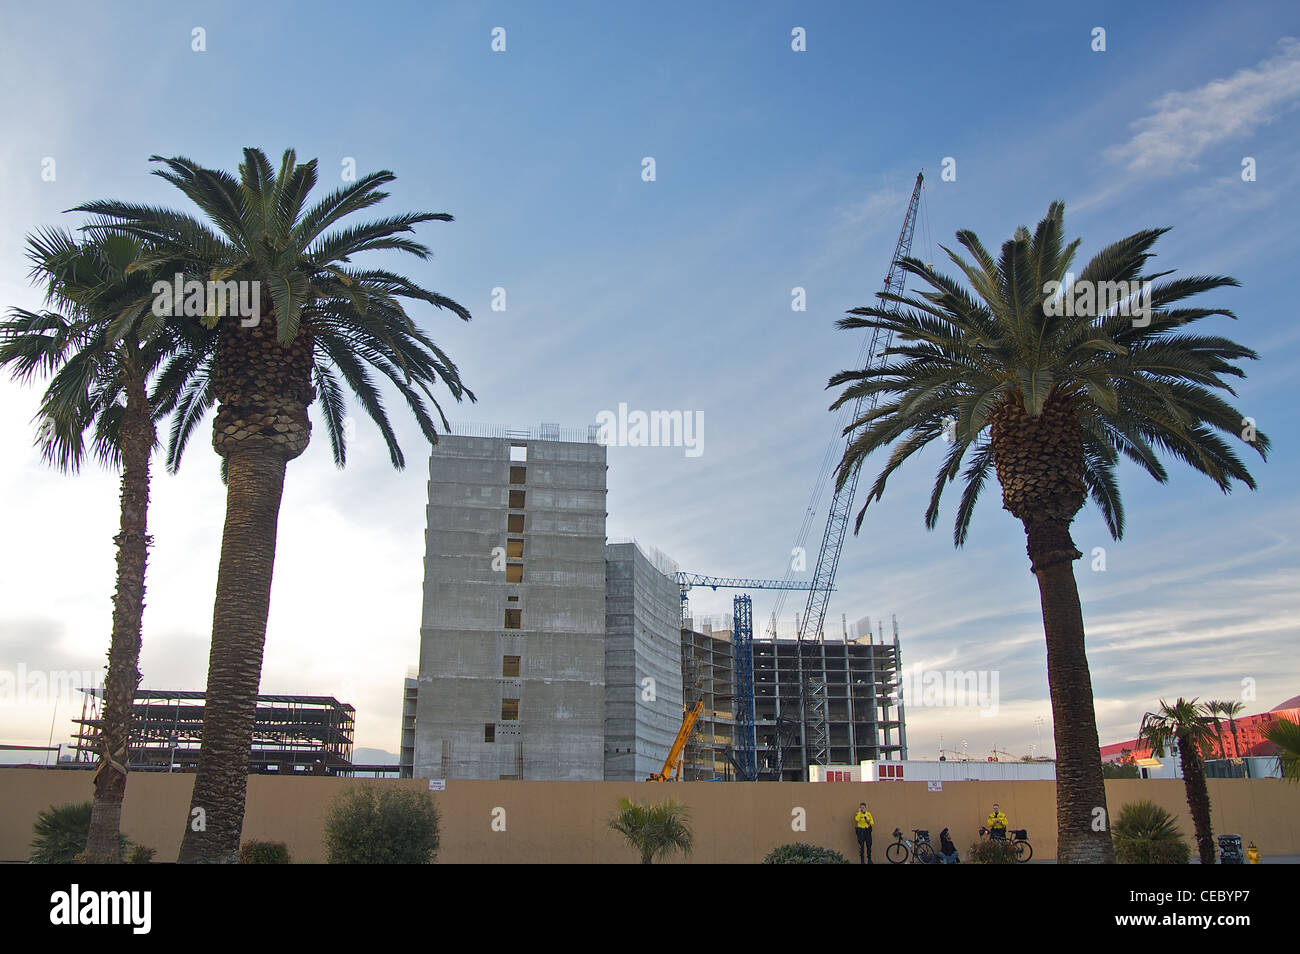 Construction on the Northern portion of the Las Vegas strip in winter, 2010 Stock Photo